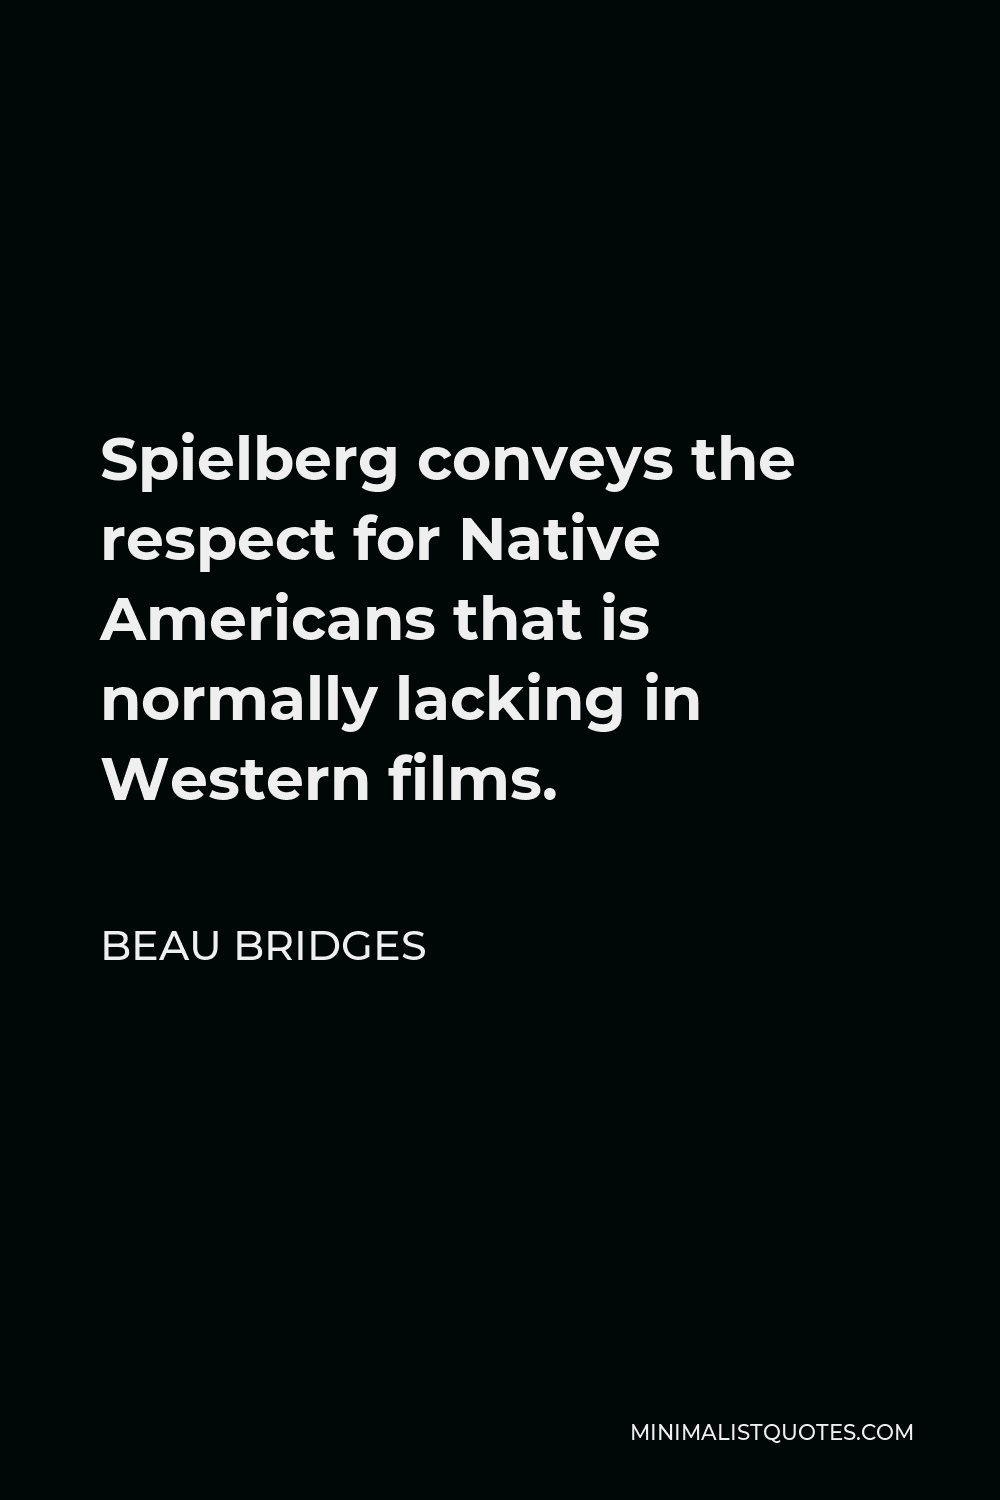 Beau Bridges Quote - Spielberg conveys the respect for Native Americans that is normally lacking in Western films.